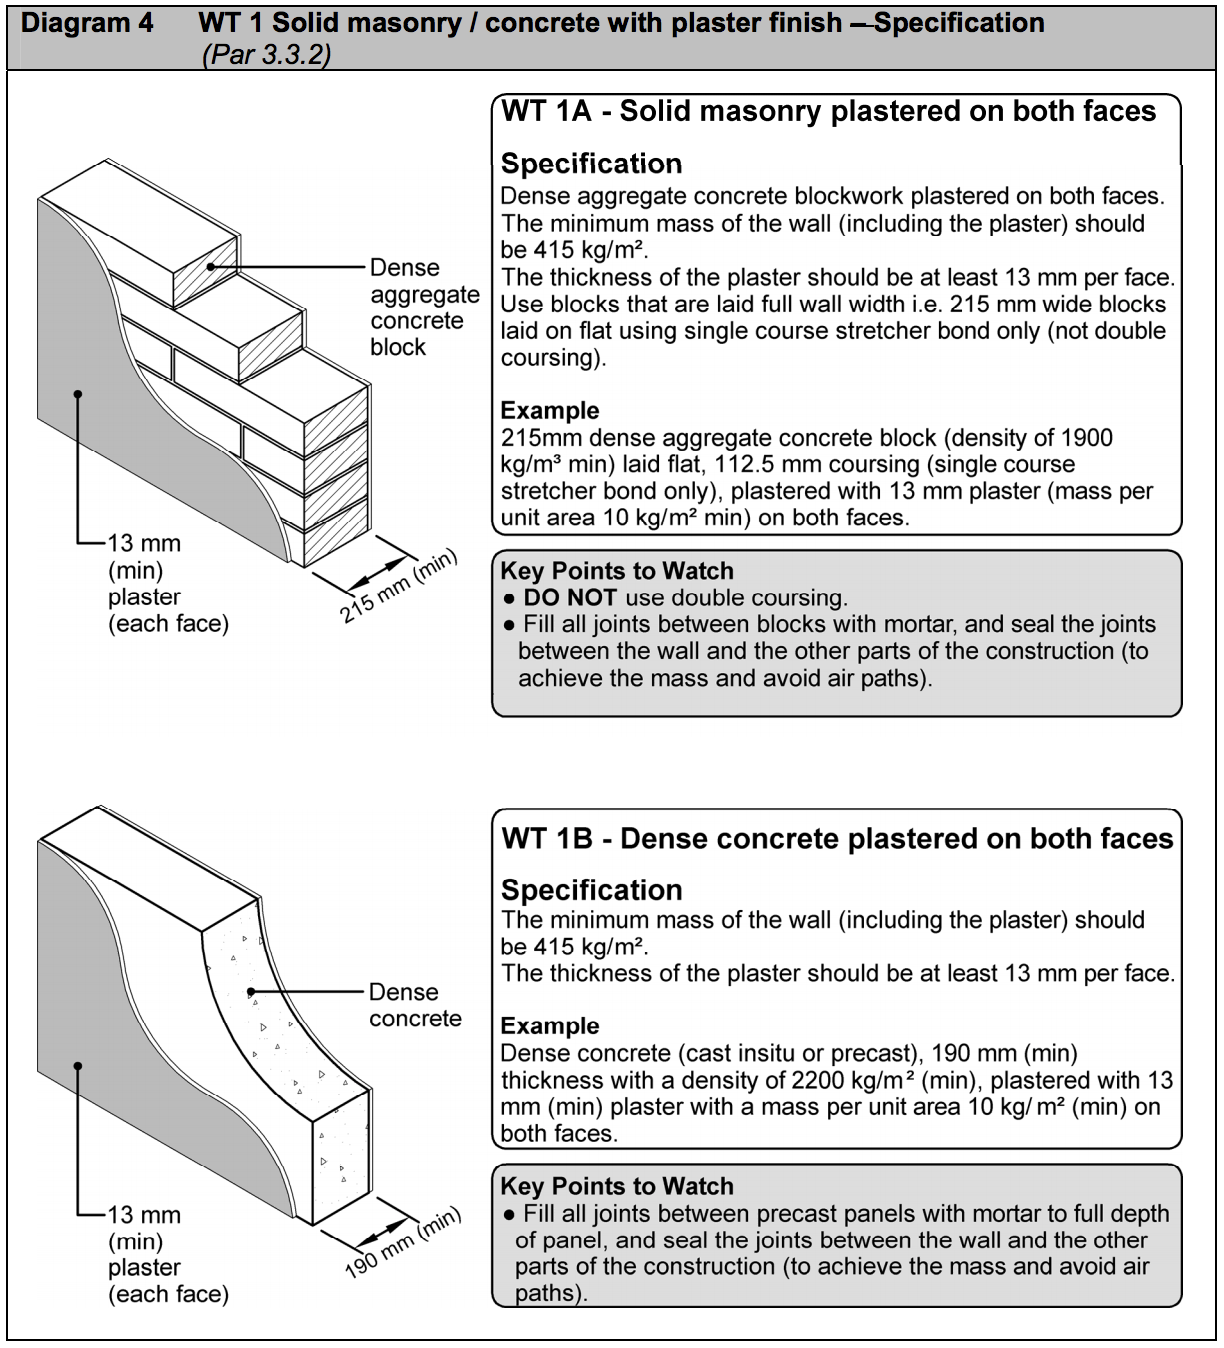 Diagram HE4 - WT 1 Solid masonry / concrete with plaster finish - Extract from TGD E